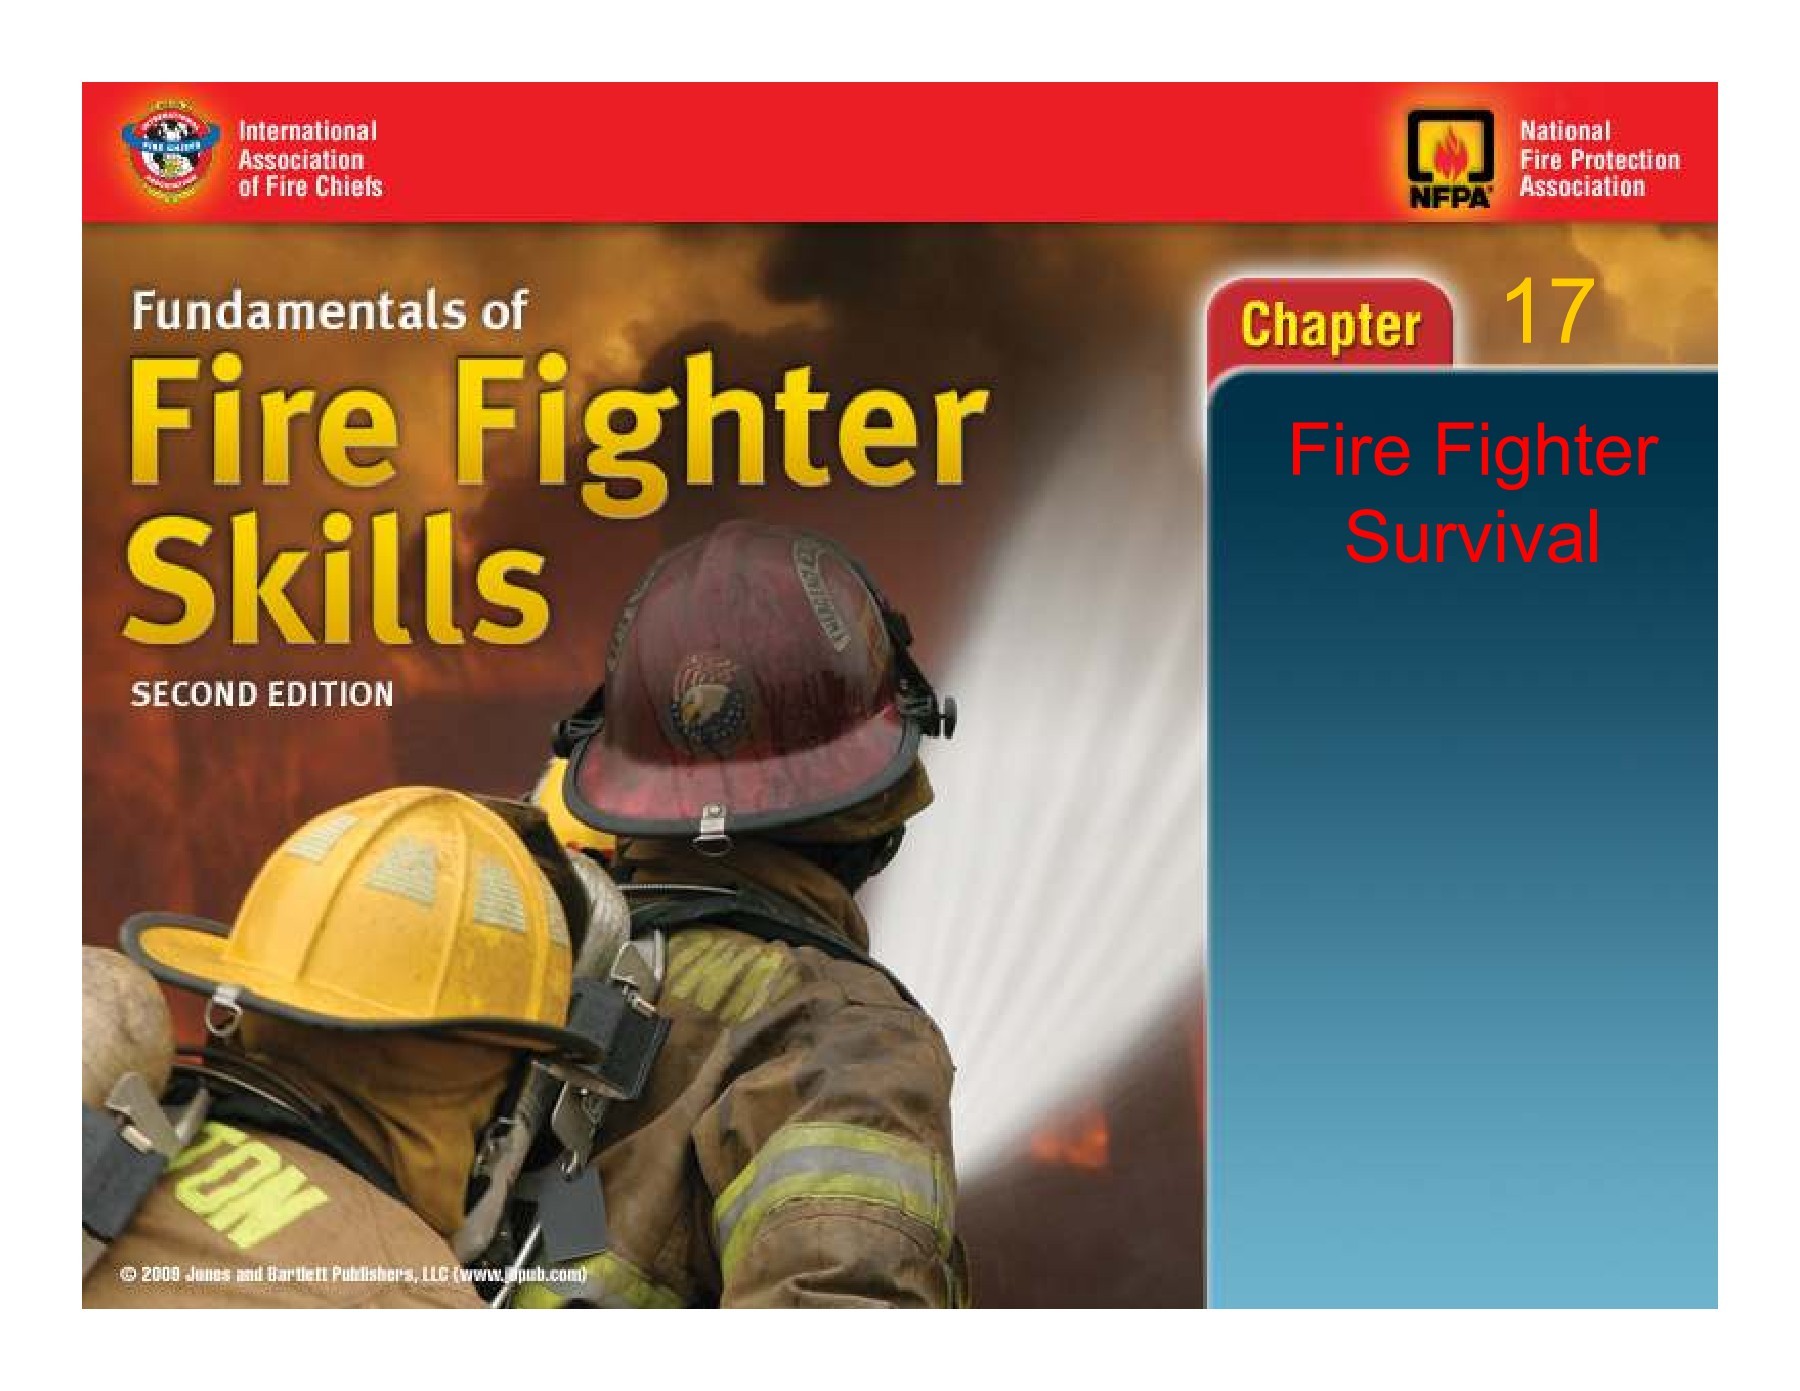 Biographies or Books About Renowned Firefighters